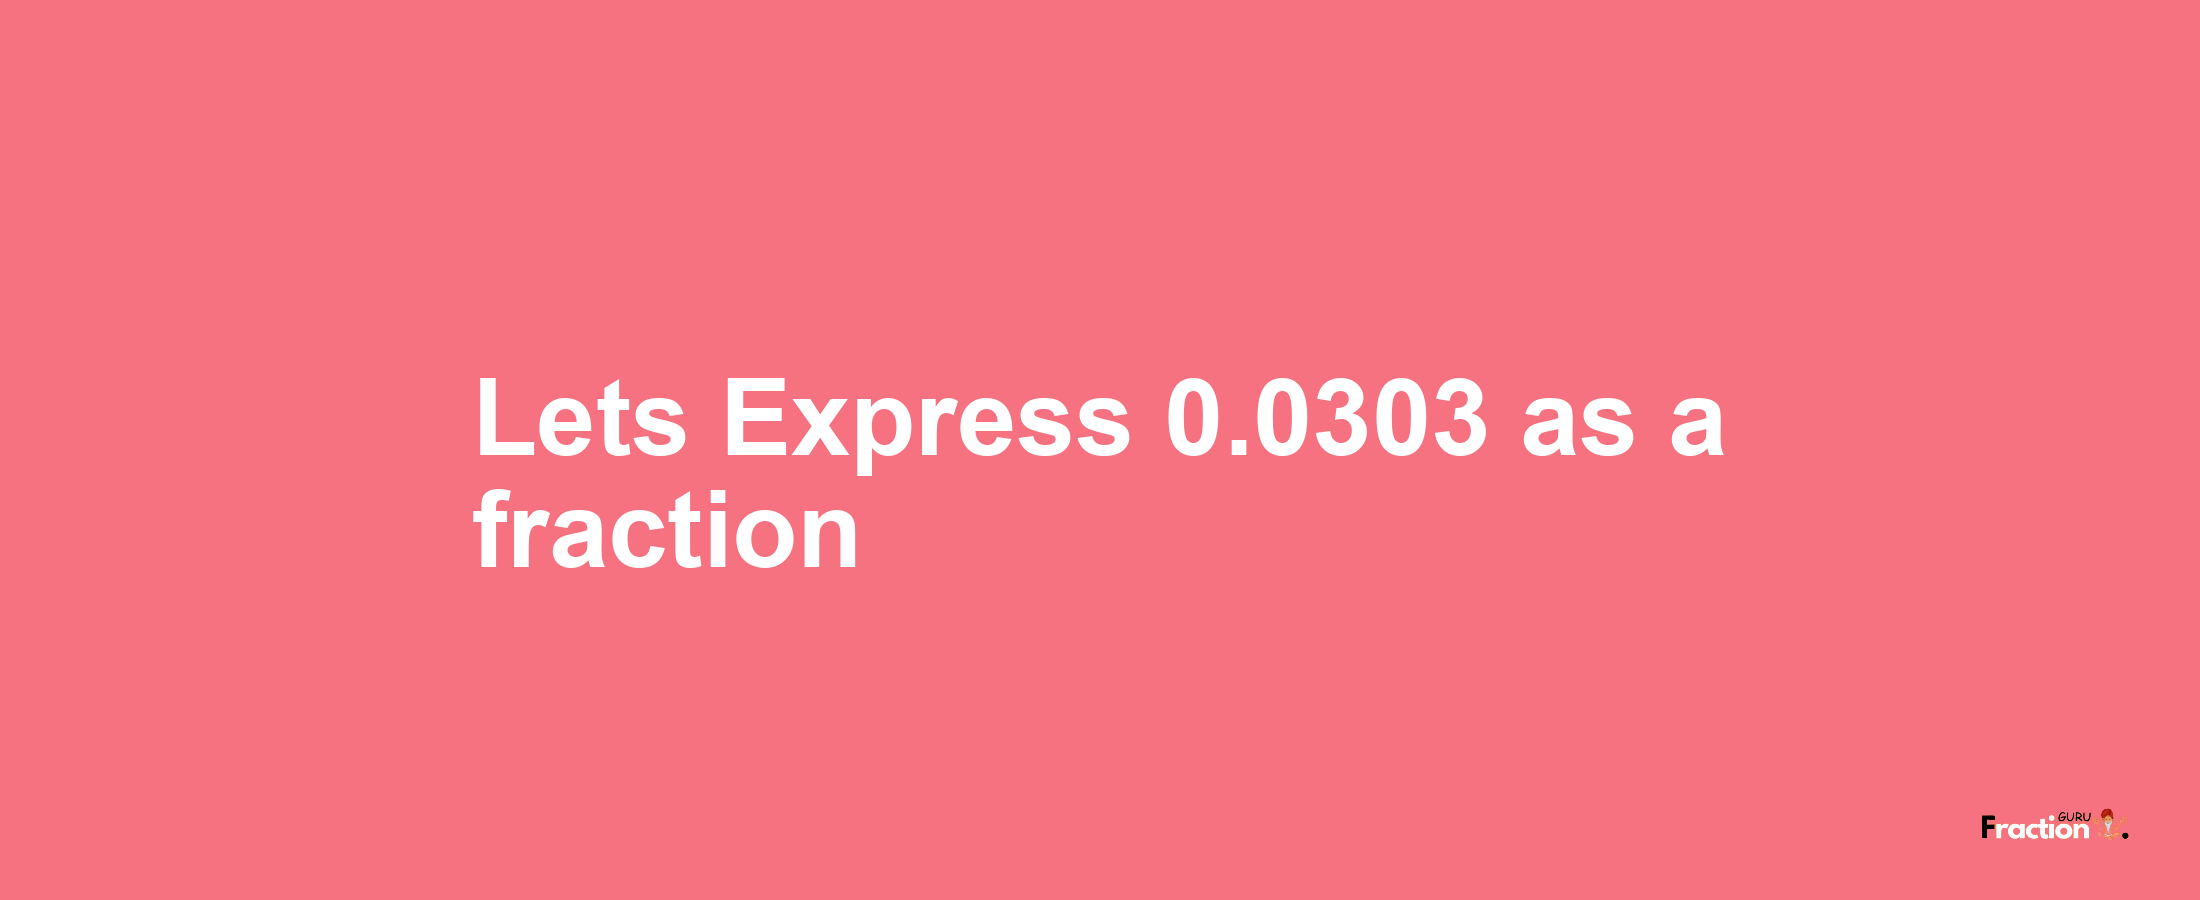 Lets Express 0.0303 as afraction